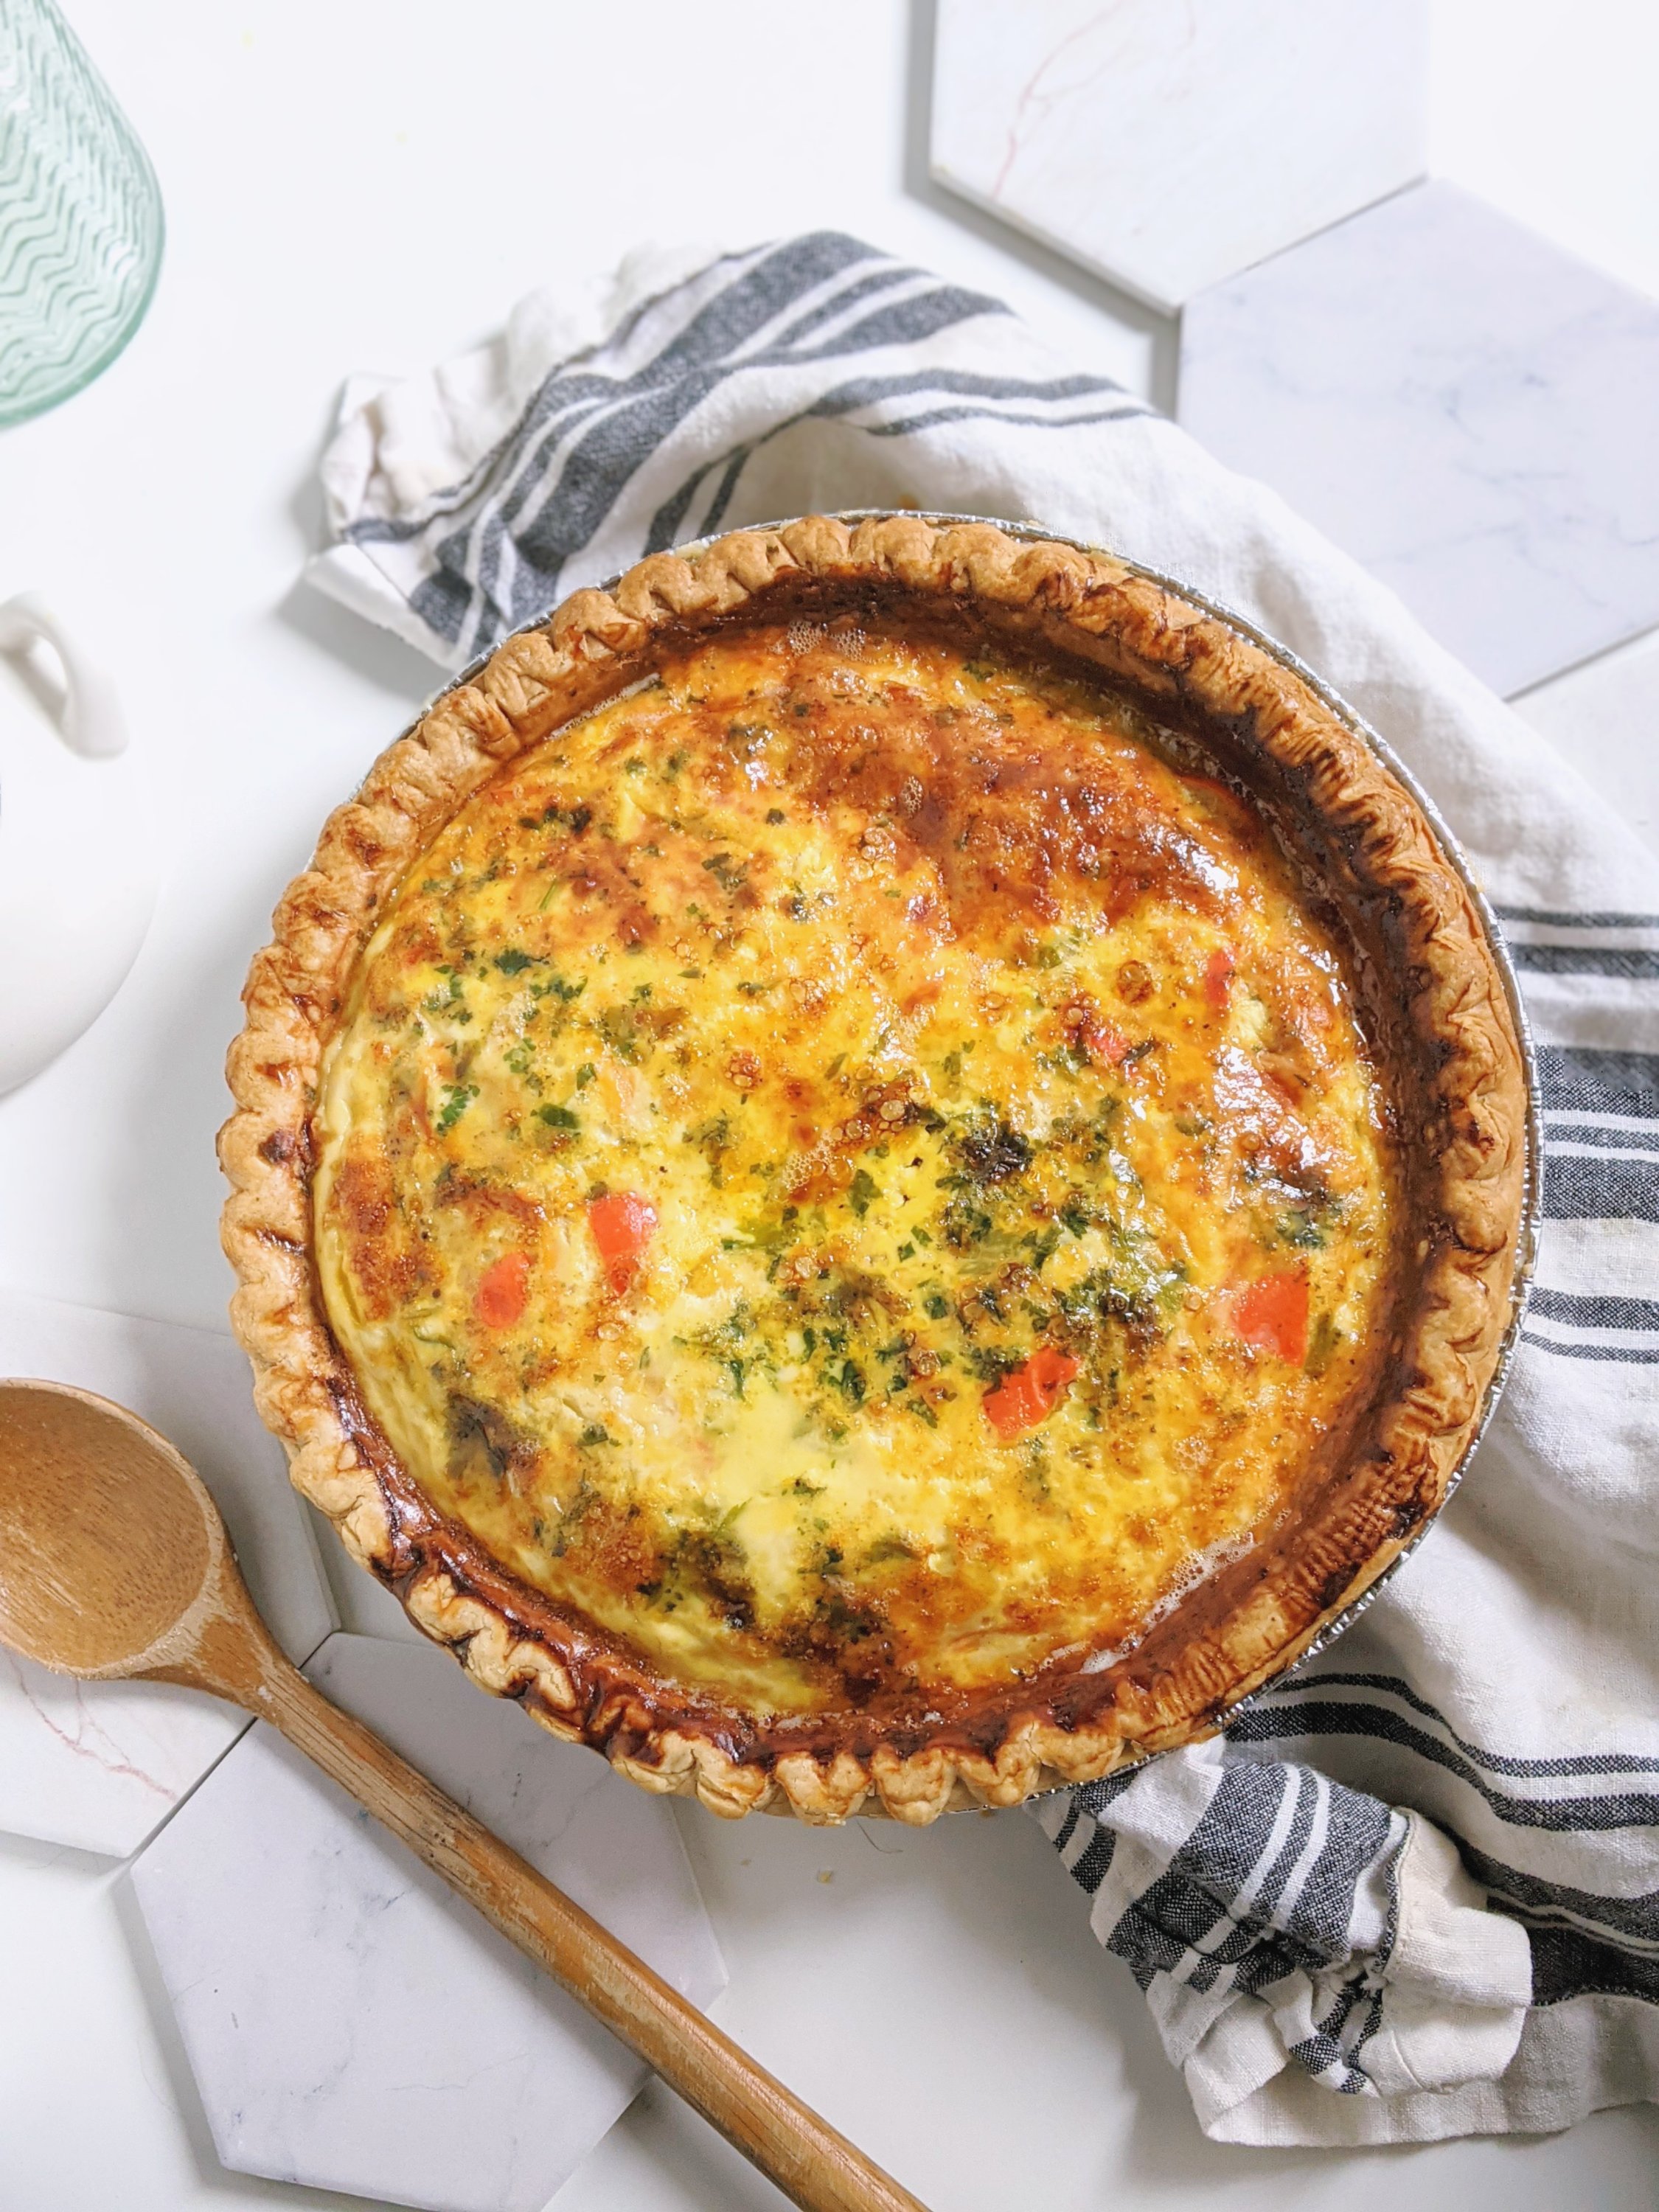 easy make ahead freezer quiche recipe with roasted red pepper spinach onion and parsley vegetarian meatless meal prep freezer meals how to cook quiche from frozen